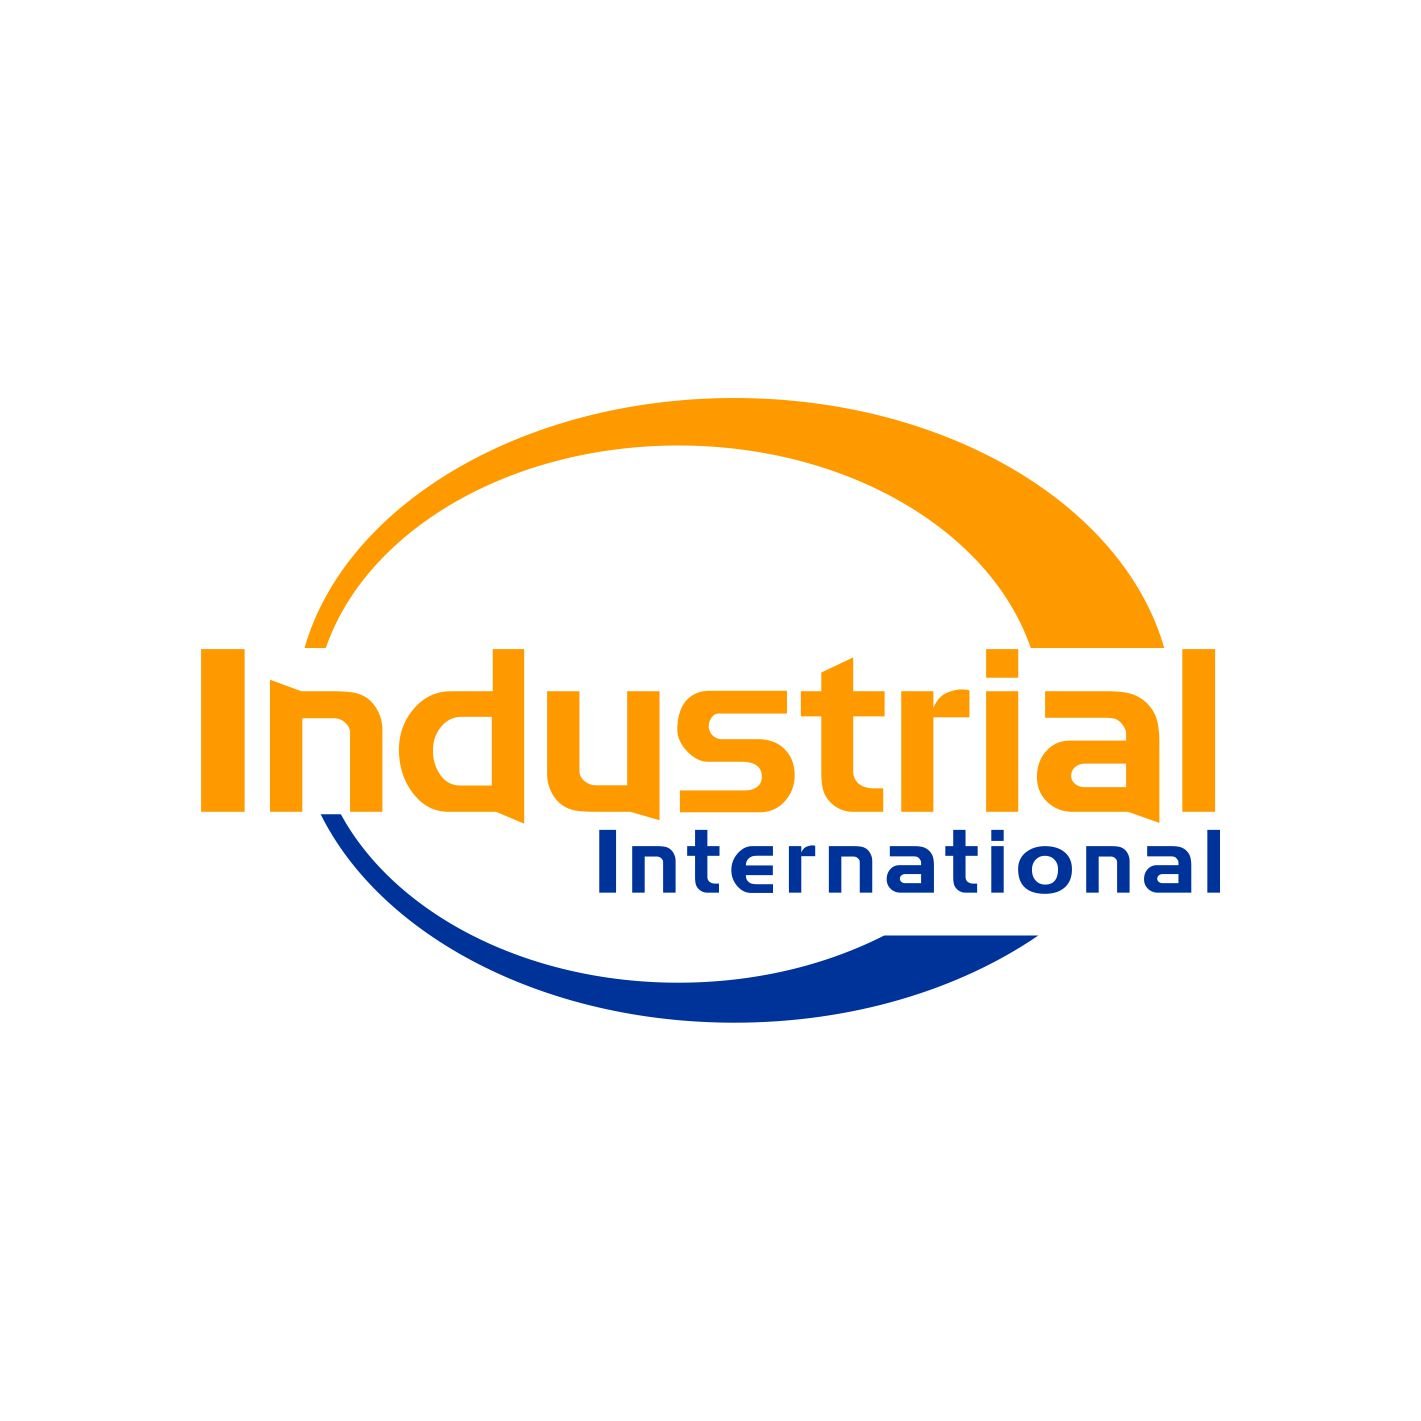 I am China's industrial internet platform. My name is Industrial International. I will provide the best Chinese industrial products for global enterprises...